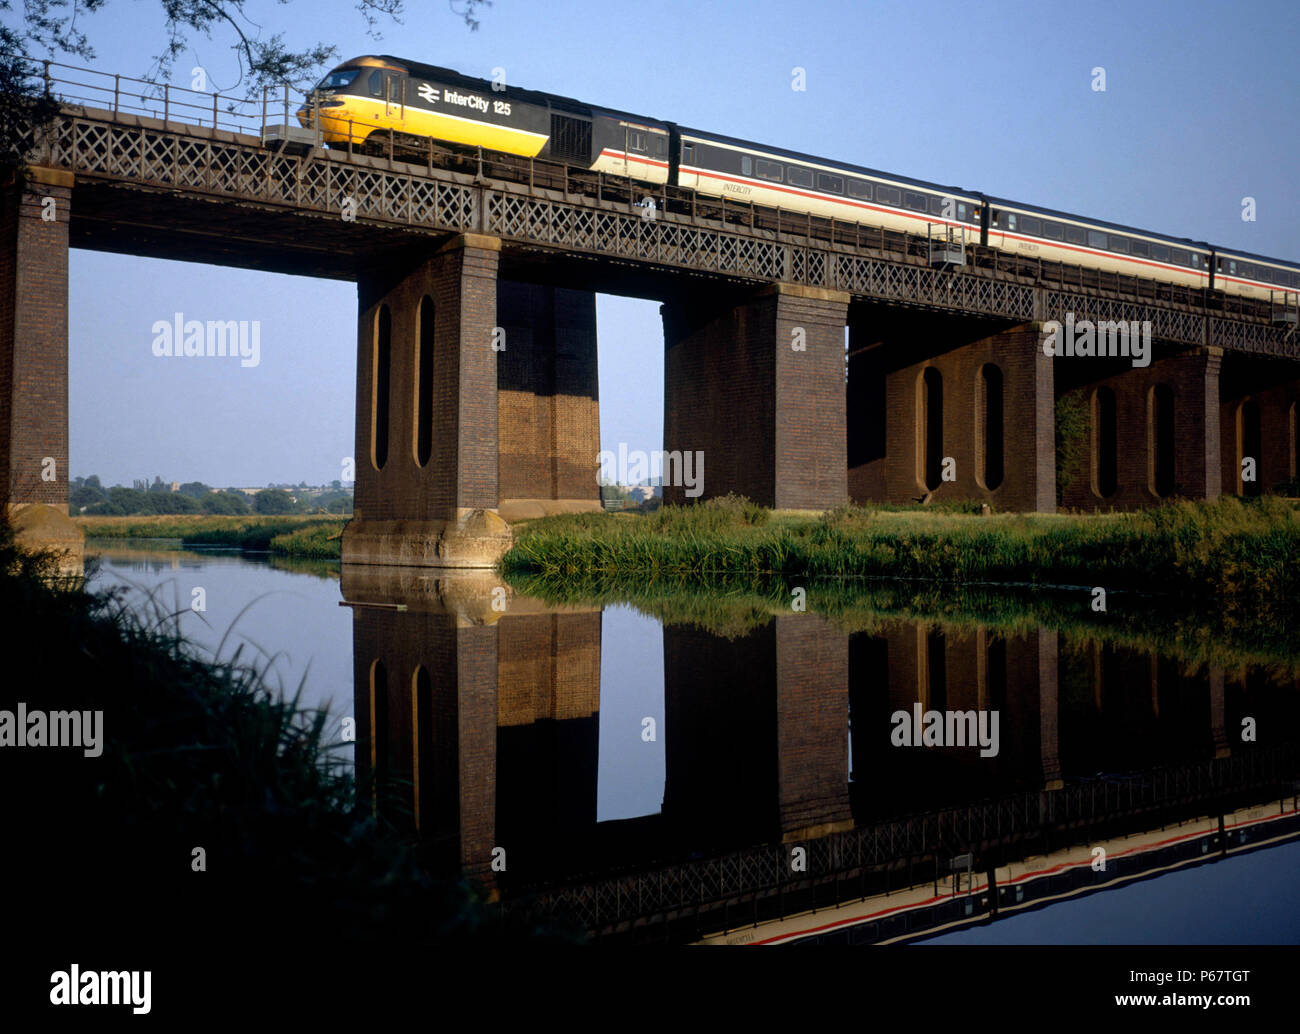 Shambrook Viaduct crossing the River Ouse in Bedfordshire with an Inter City liveried 125 High Speed Train heading an afternoon service northwards alo Stock Photo